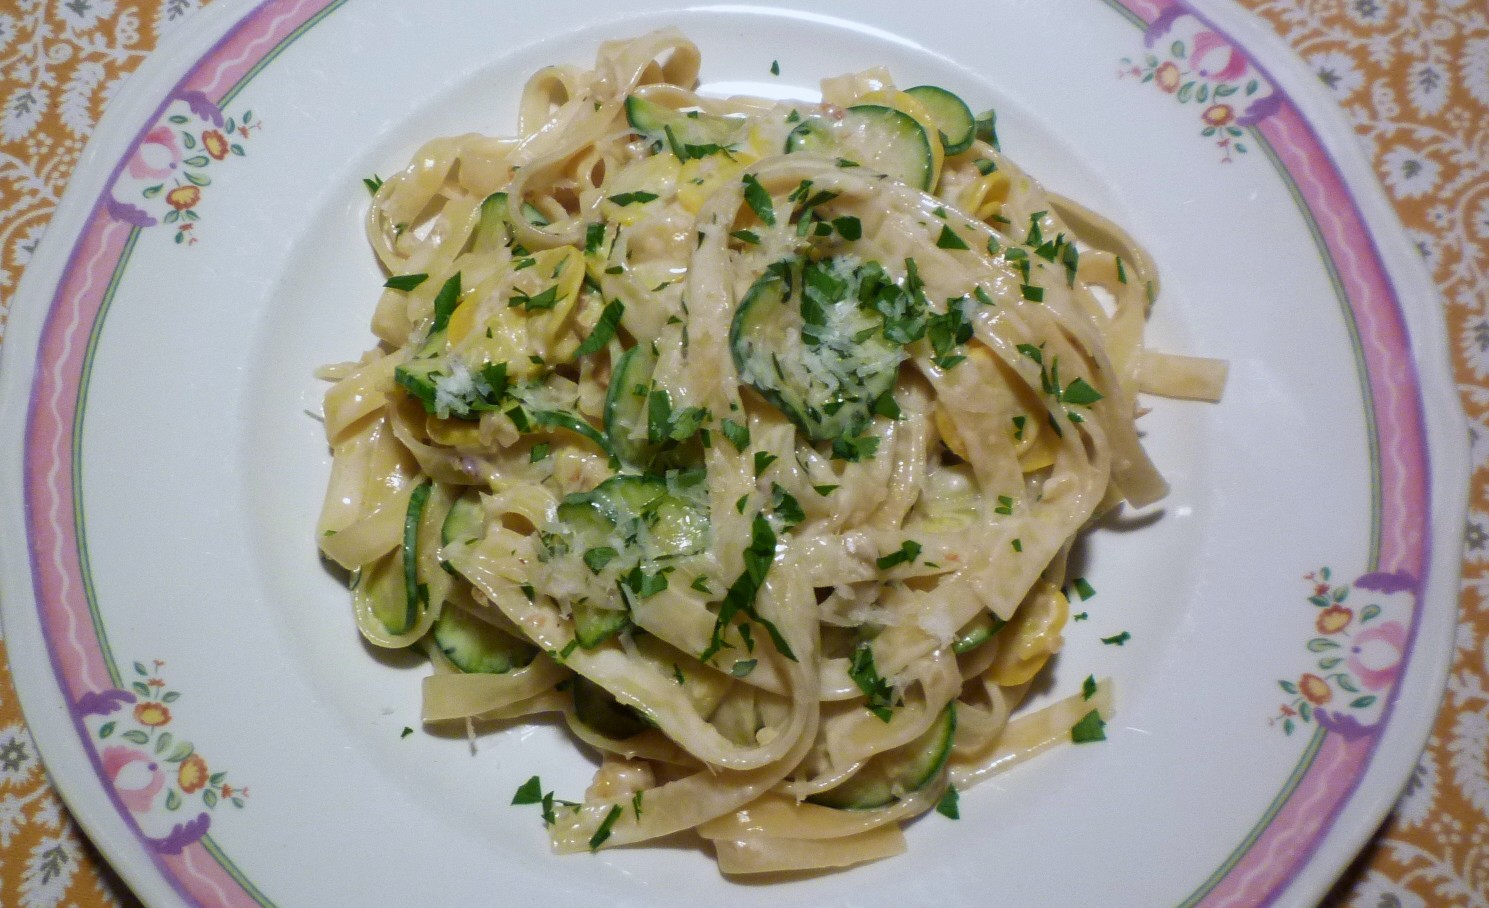 For Love of the Table: Fettuccine with Cream, Walnuts &amp; Summer Squash